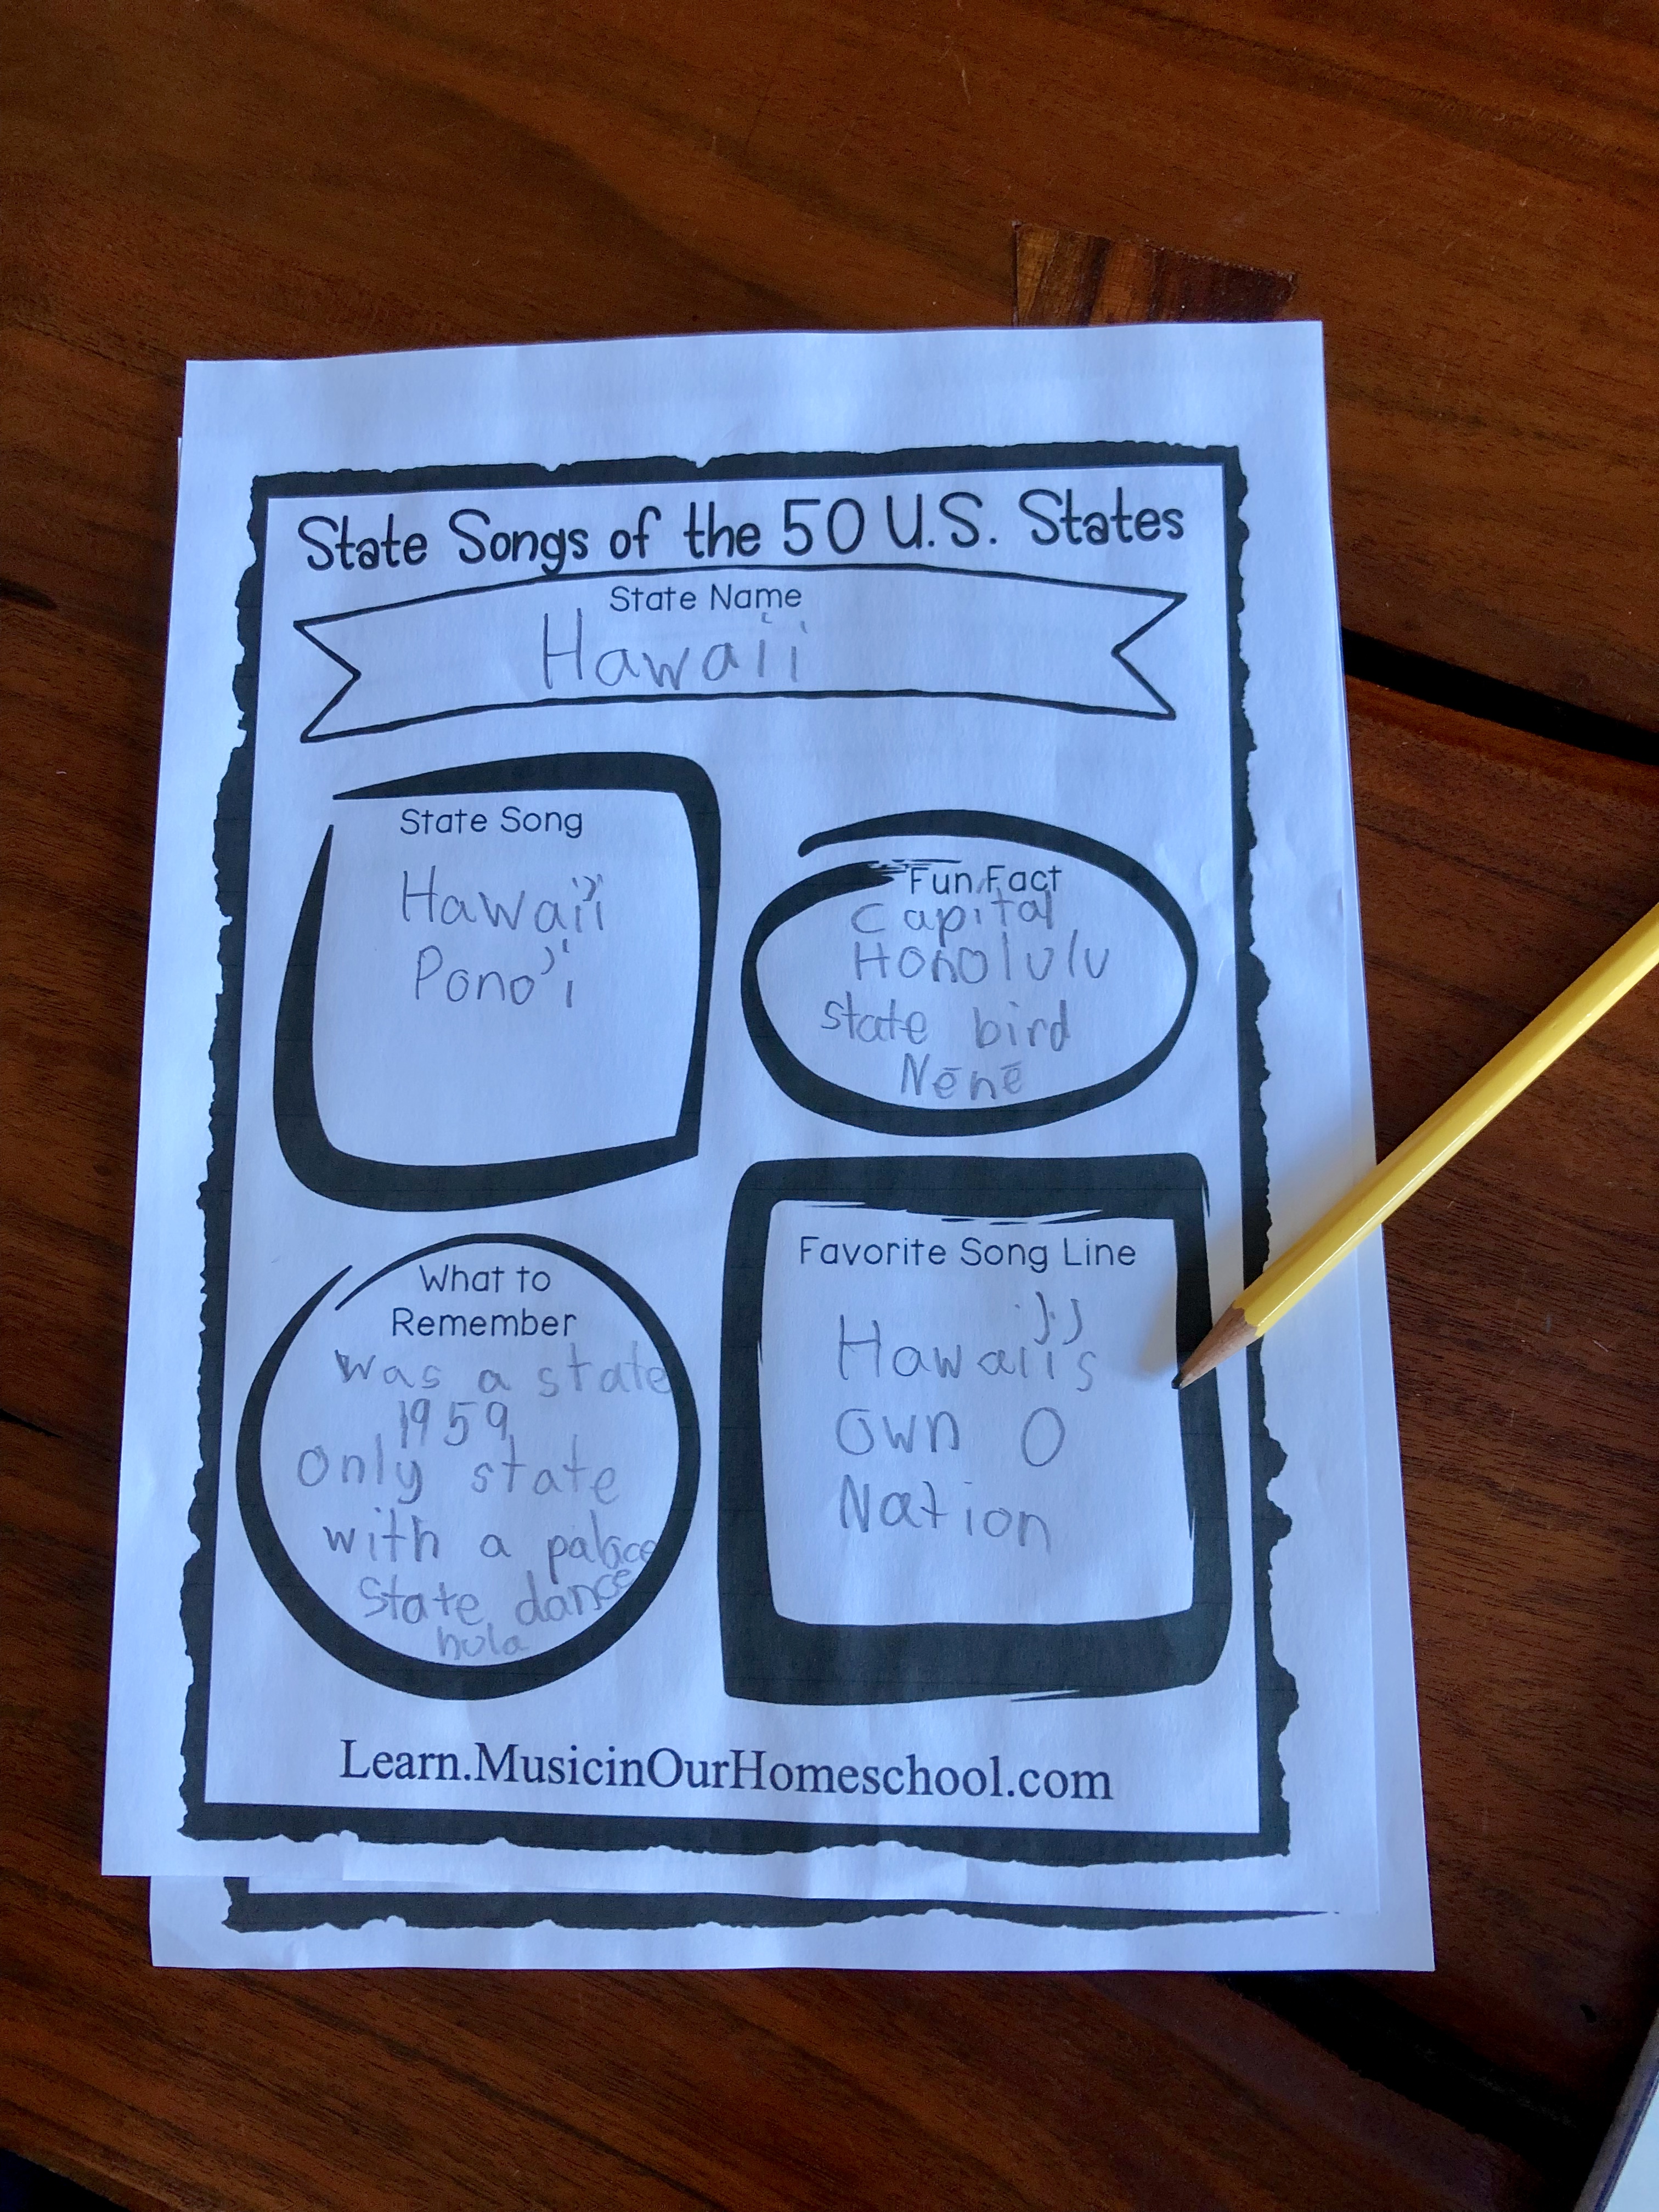 Here is a notebooking page from State Songs of the 50 U.S. States online course, the perfect way to learn all about the U.S. States and do some music along the way! #musiceducation #elementarymusic #musiclessonsforkids #musicinourhomeschool #statesongscourse